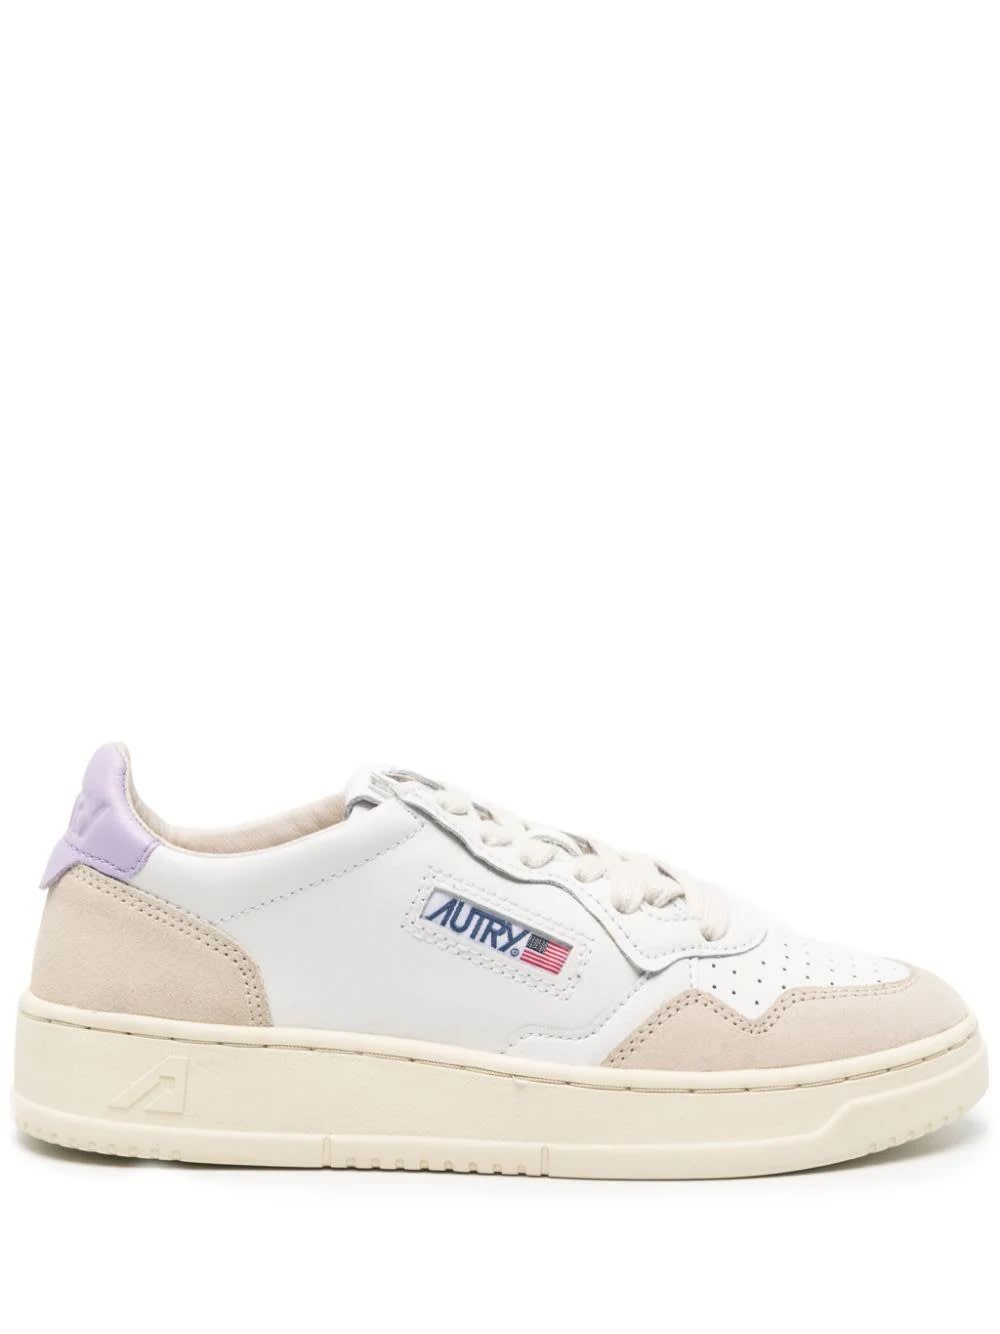 AUTRY MEDALIST LOW SNEAKERS IN WHITE AND LILAC SUEDE AND LEATHER